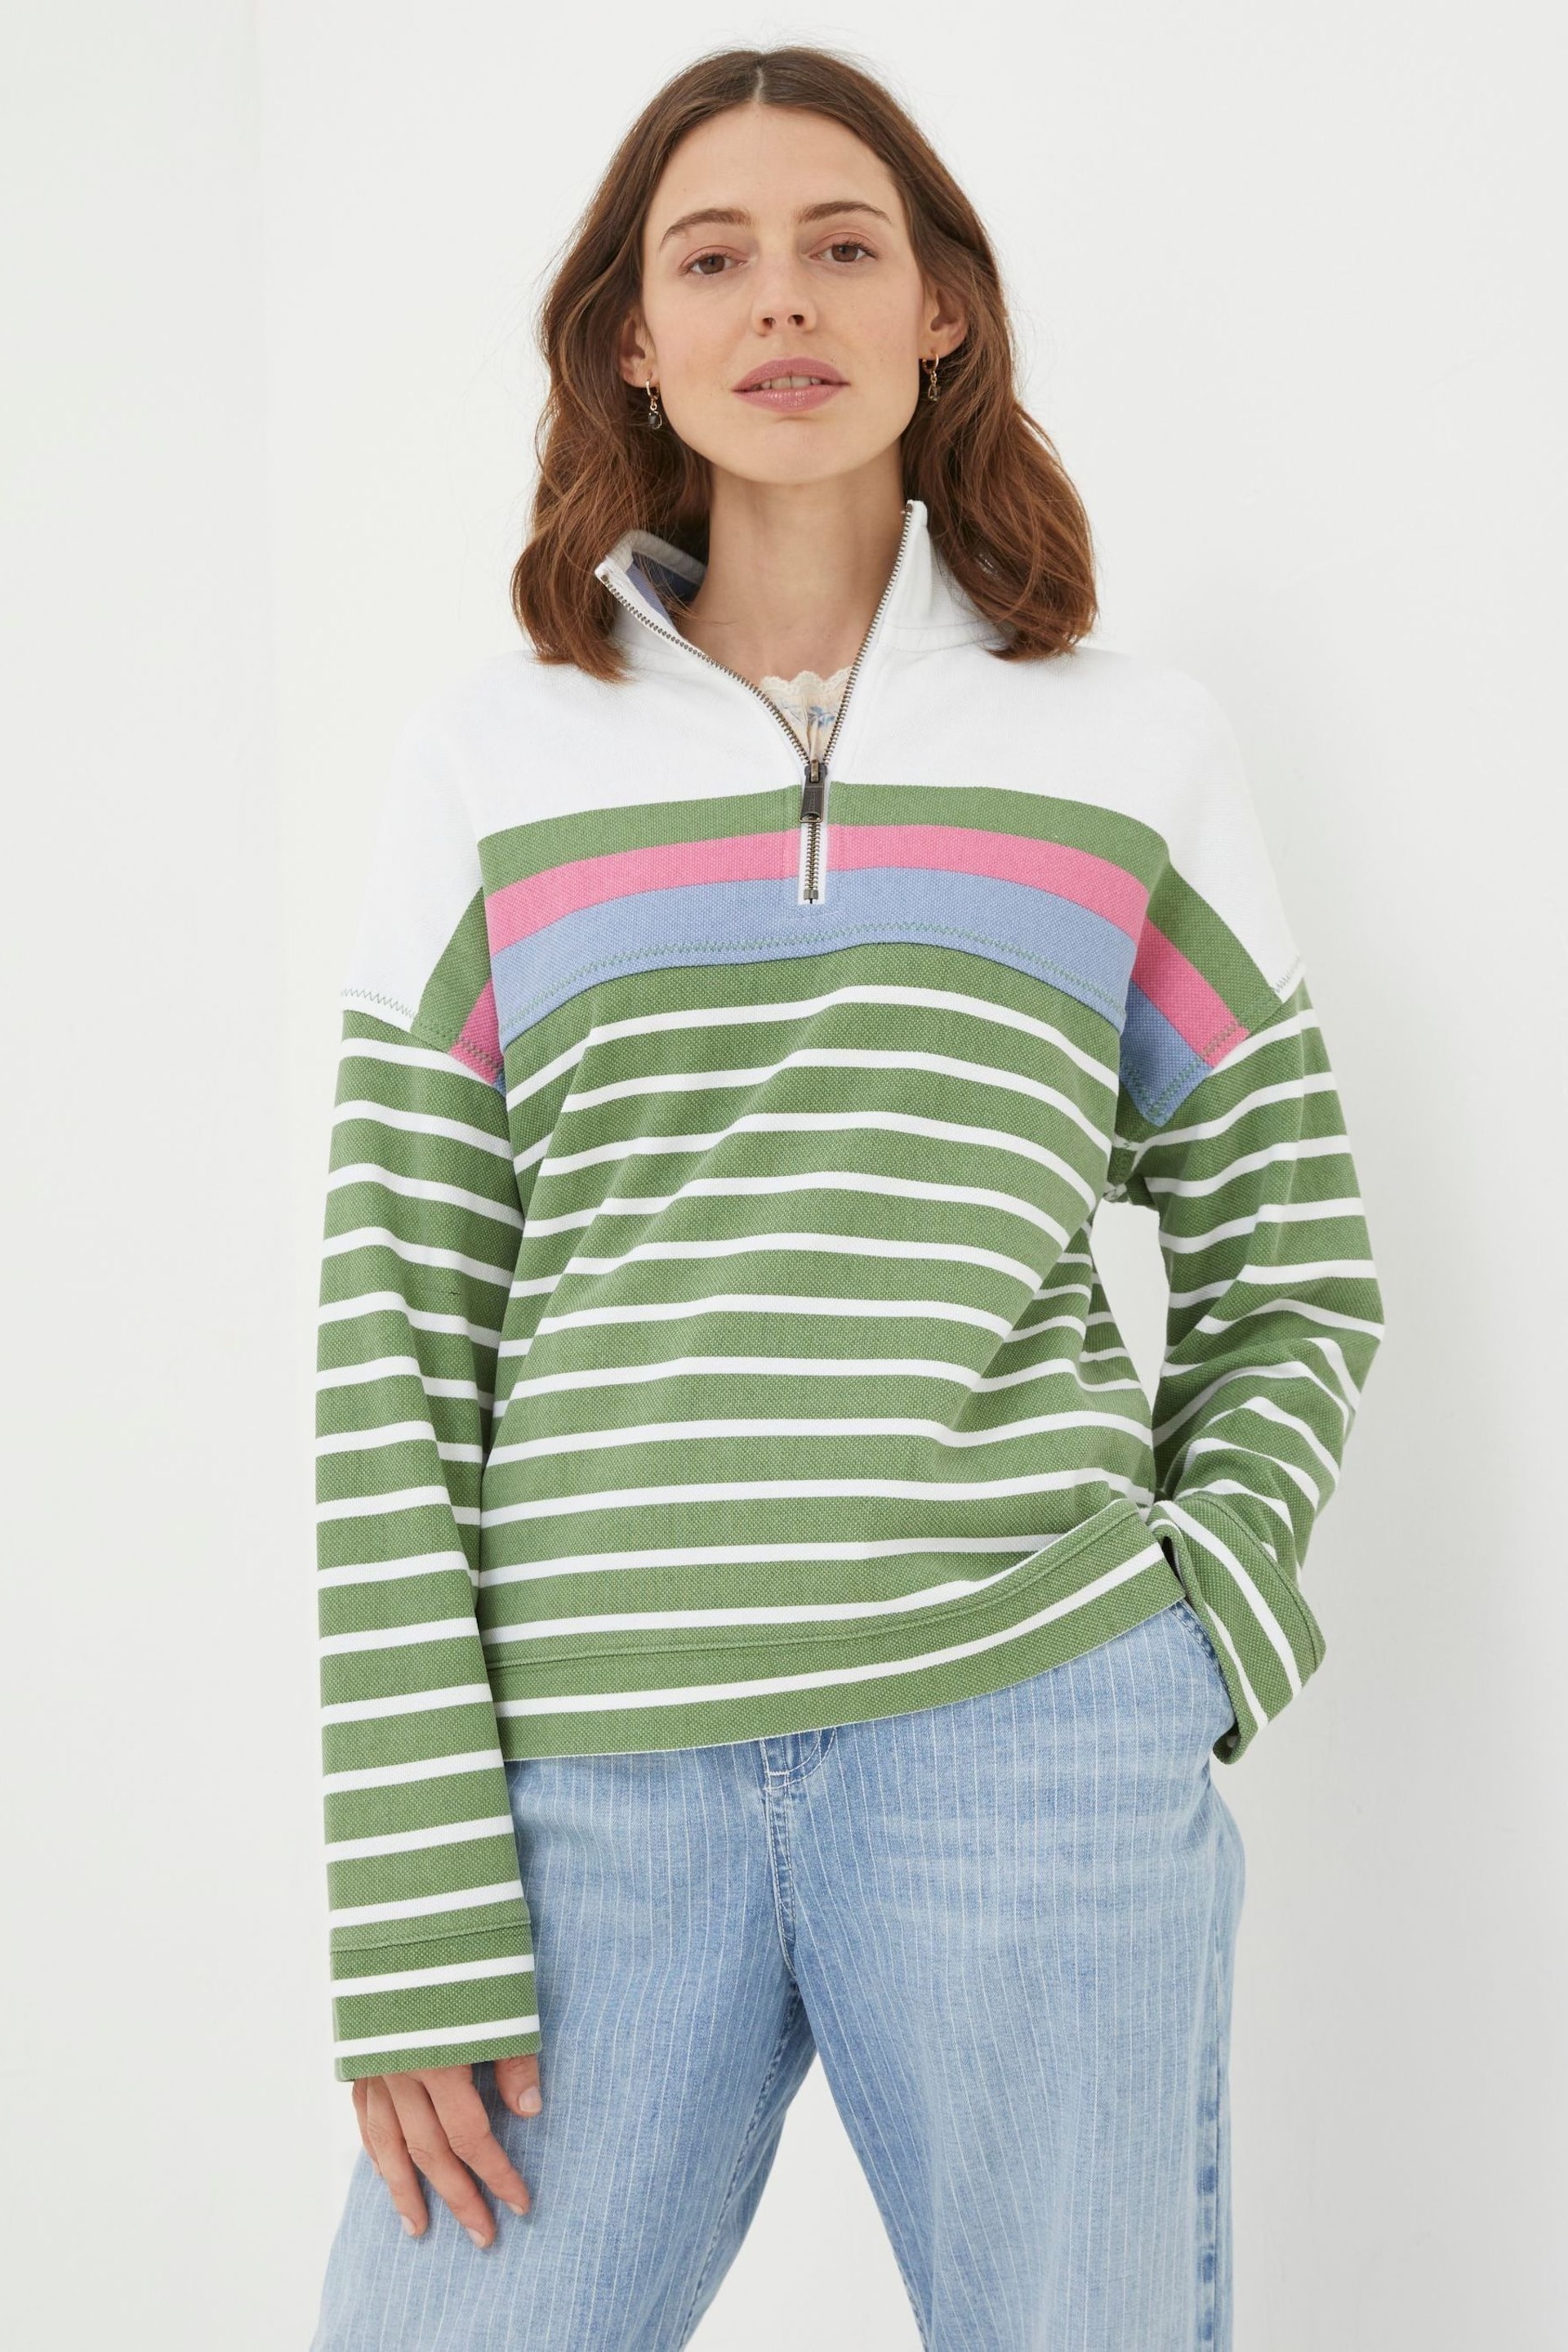 FatFace Green Relaxed Airlie Stripe Sweatshirt - Image 1 of 5